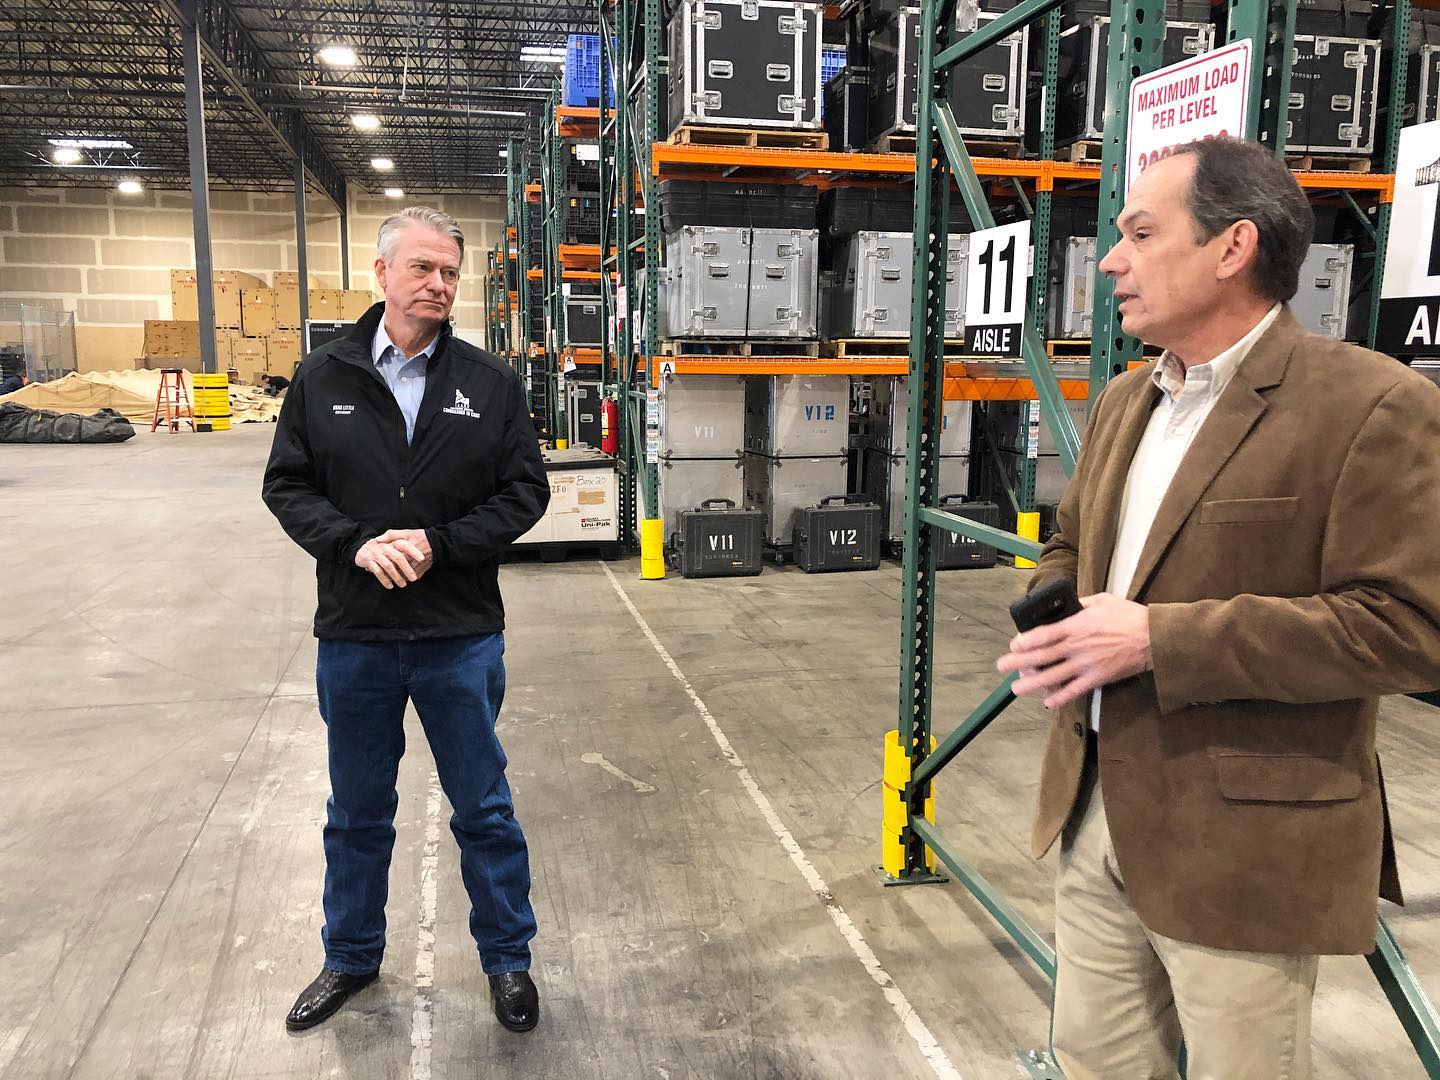 Idaho Governor Brad Little at state medical supplies stockpile in Boise - April 14 2020